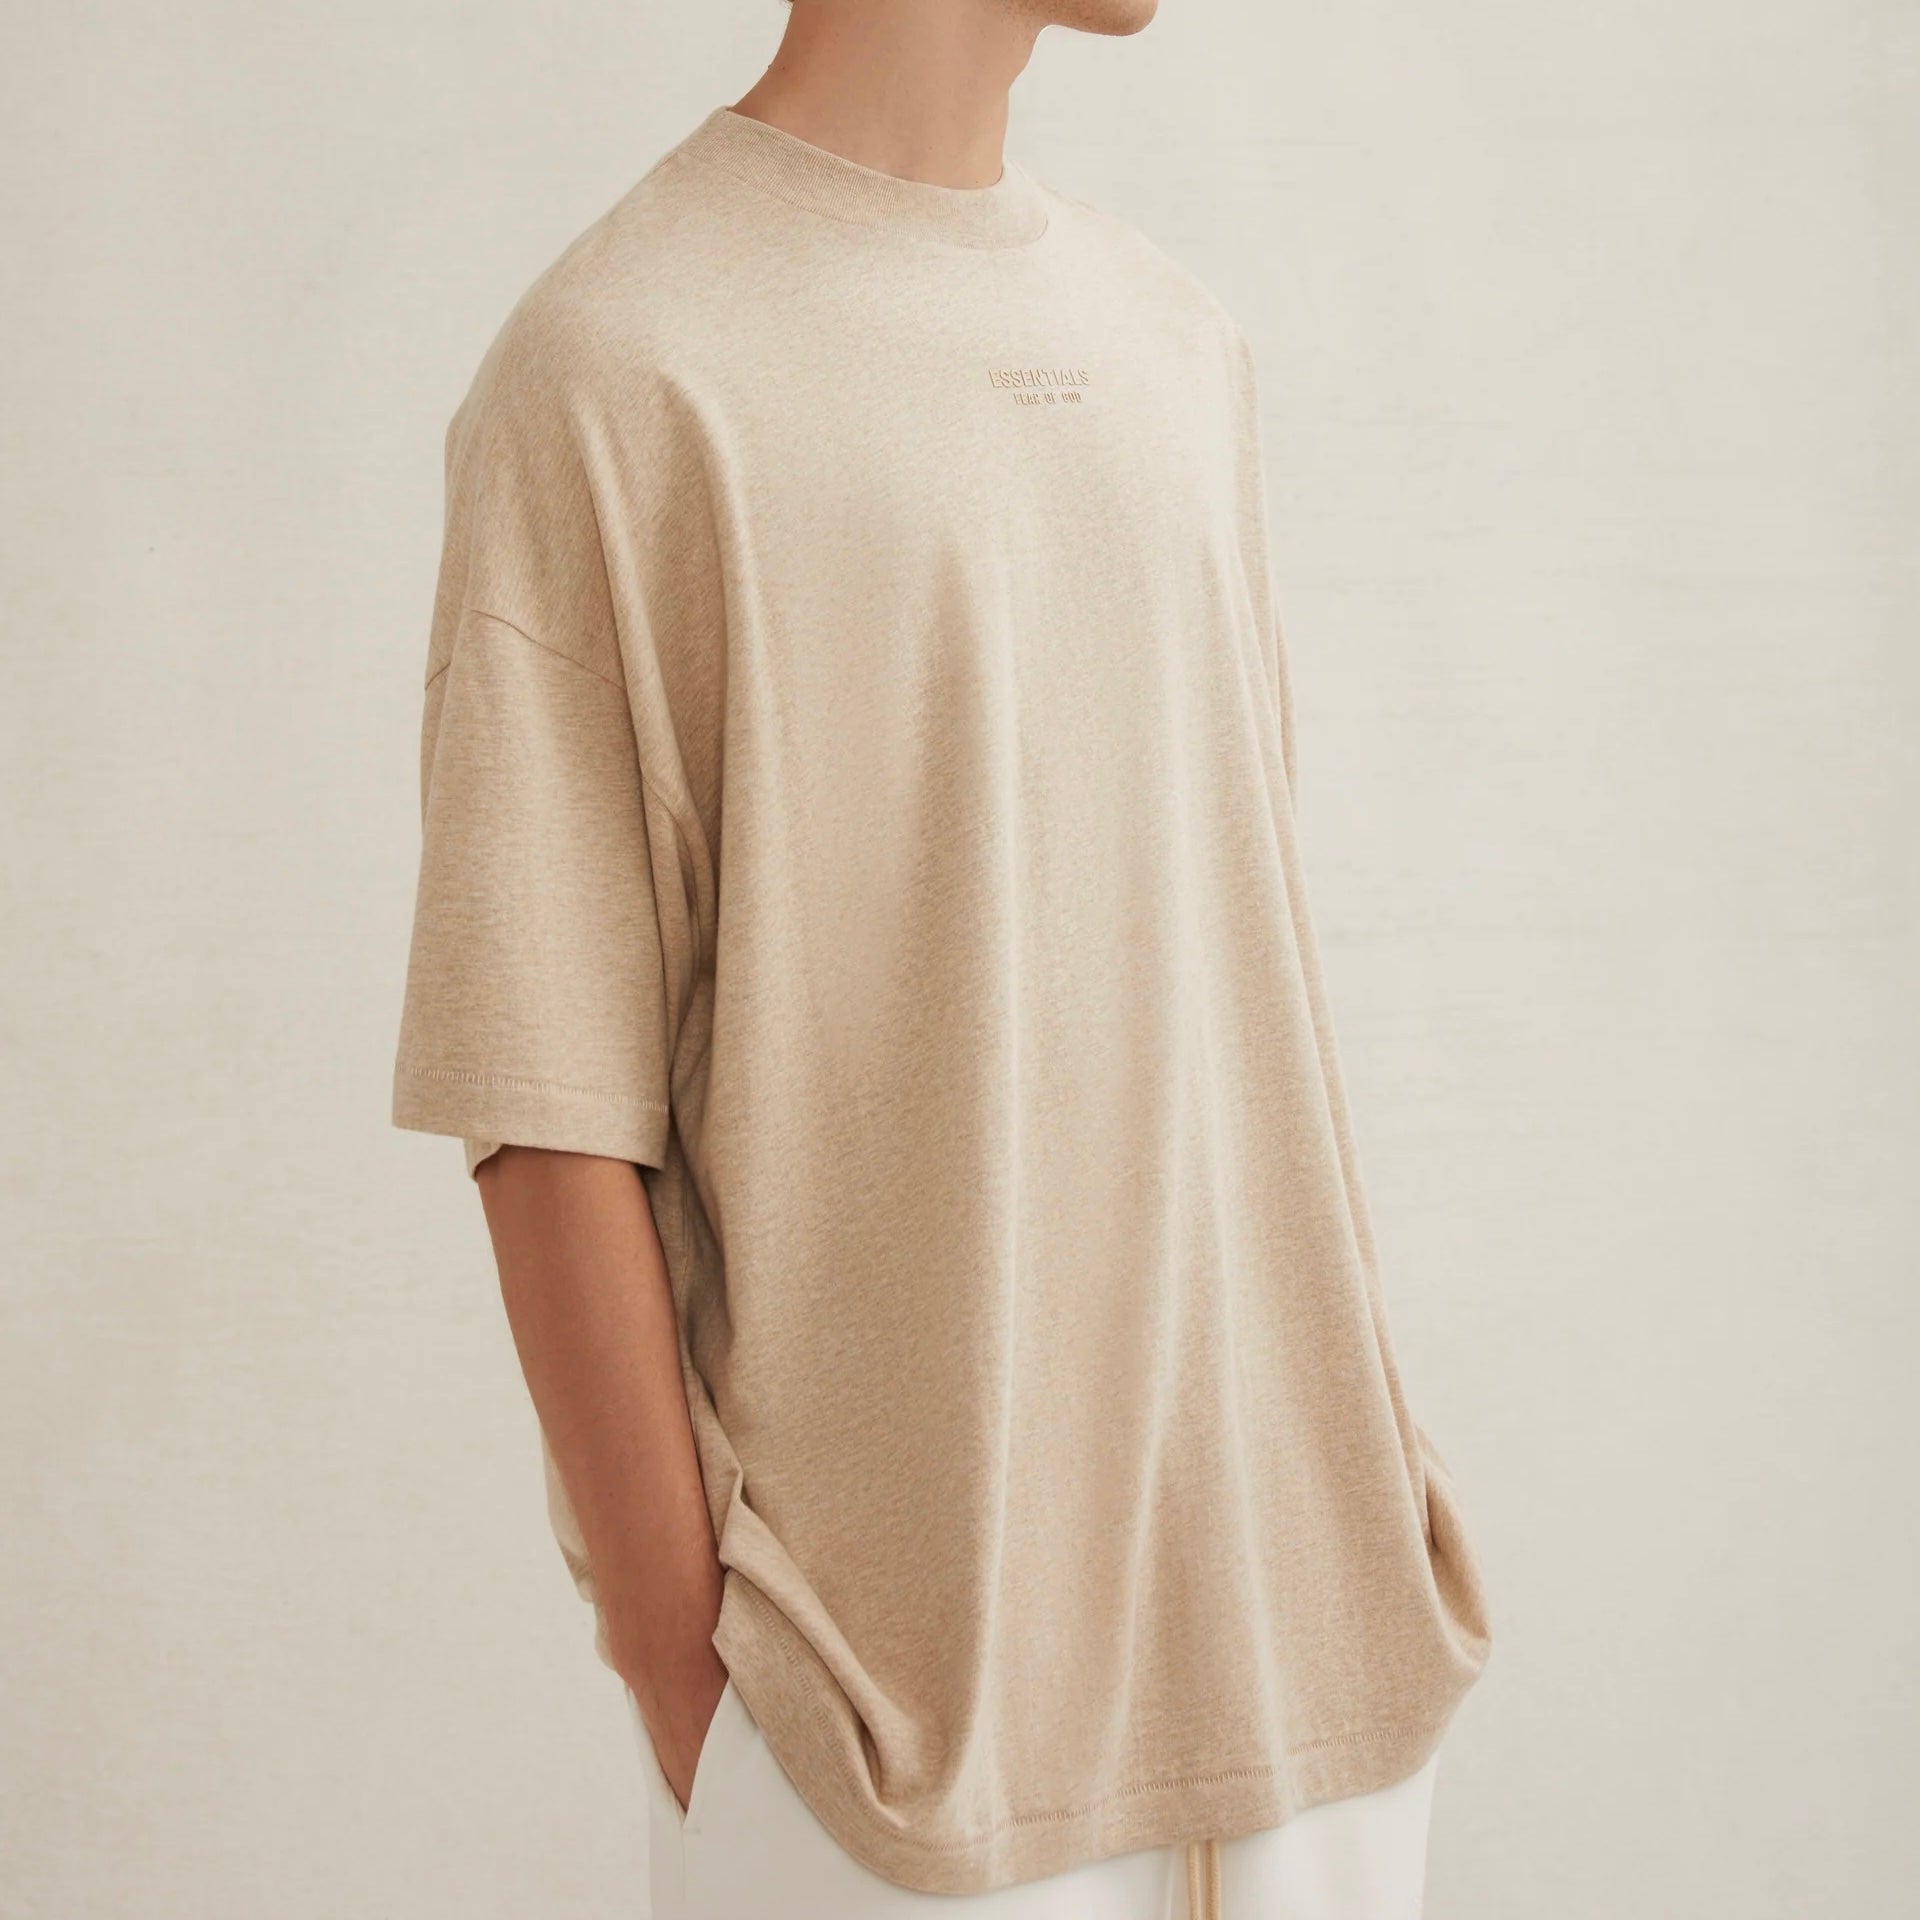 Fear of God Essentials Gold Heather T-Shirt On Body View